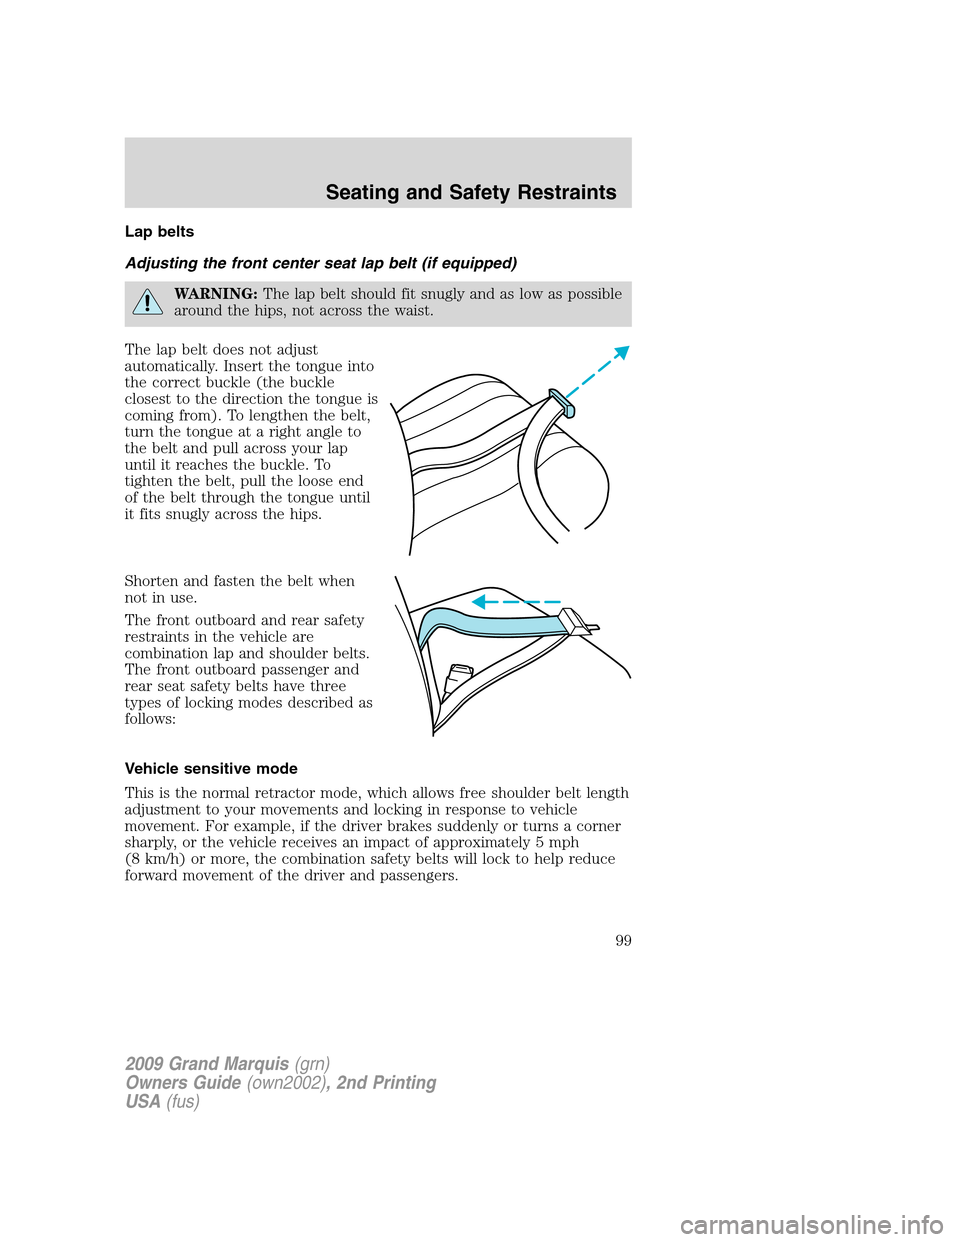 Mercury Grand Marquis 2009  s User Guide Lap belts
Adjusting the front center seat lap belt (if equipped)
WARNING:The lap belt should fit snugly and as low as possible
around the hips, not across the waist.
The lap belt does not adjust
autom